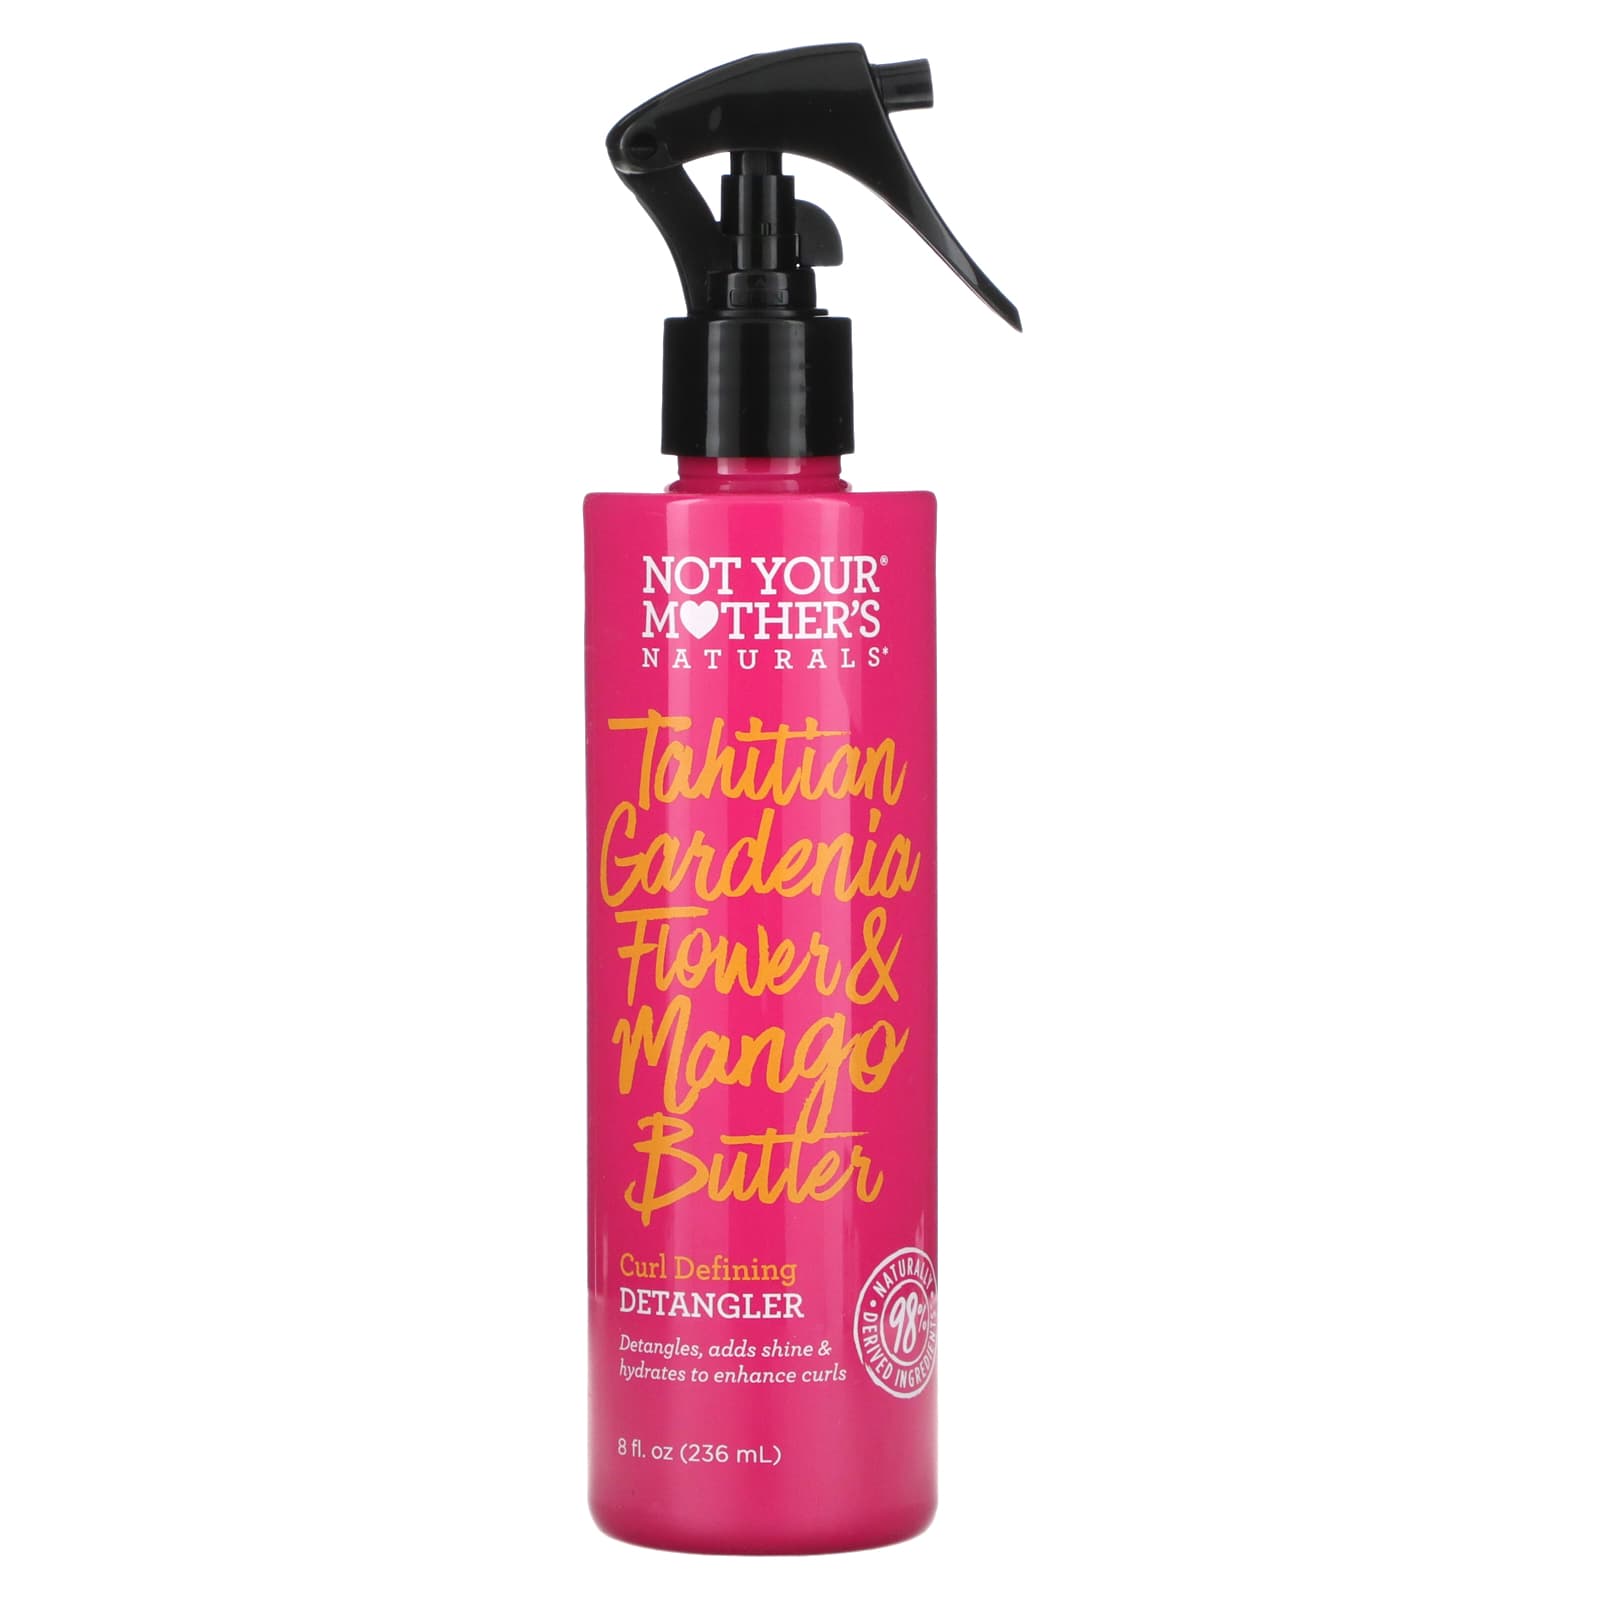 Not Your Mother's Curl Talk Refreshing Curl Foam - 8 fl oz